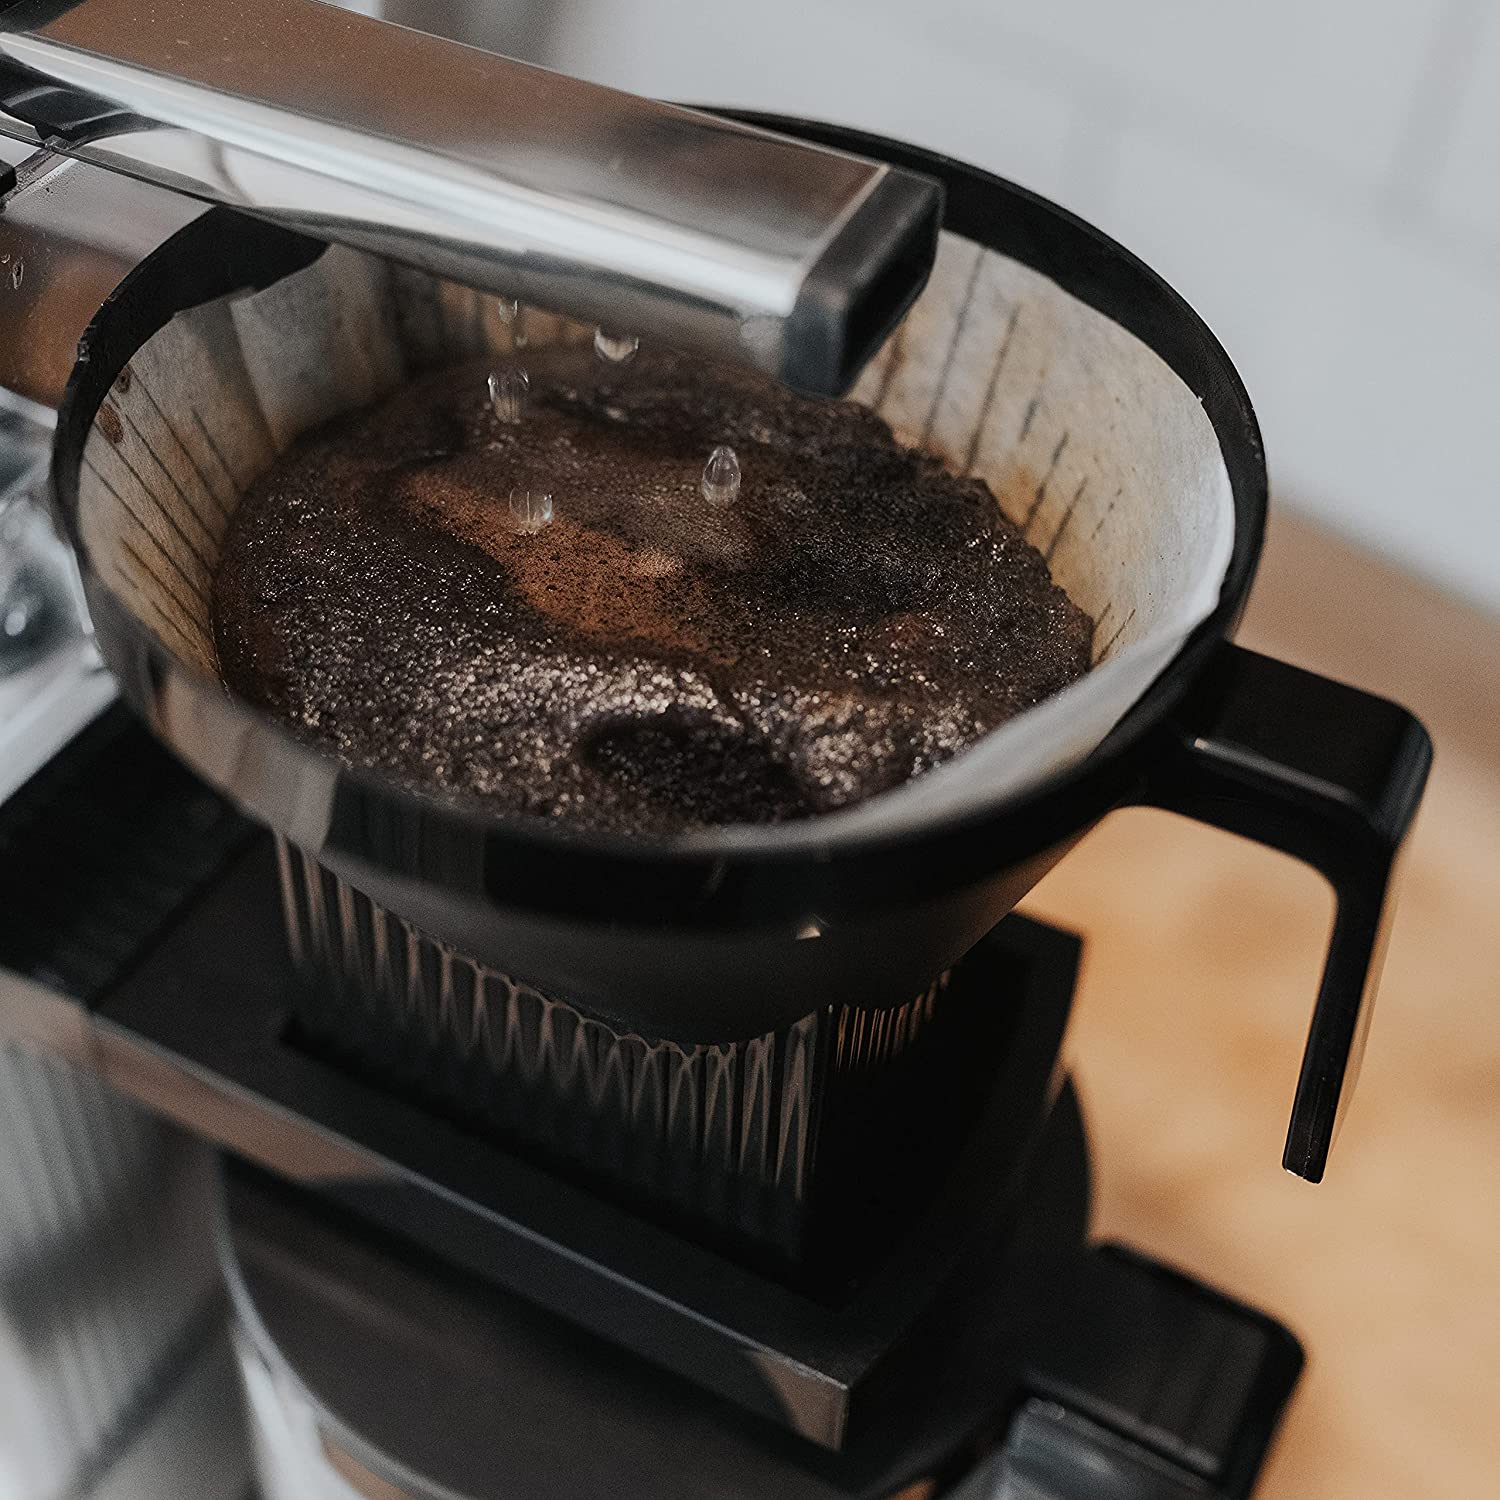 Technivorm Moccamaster KBGV Select review: Delicious drip coffee - Reviewed